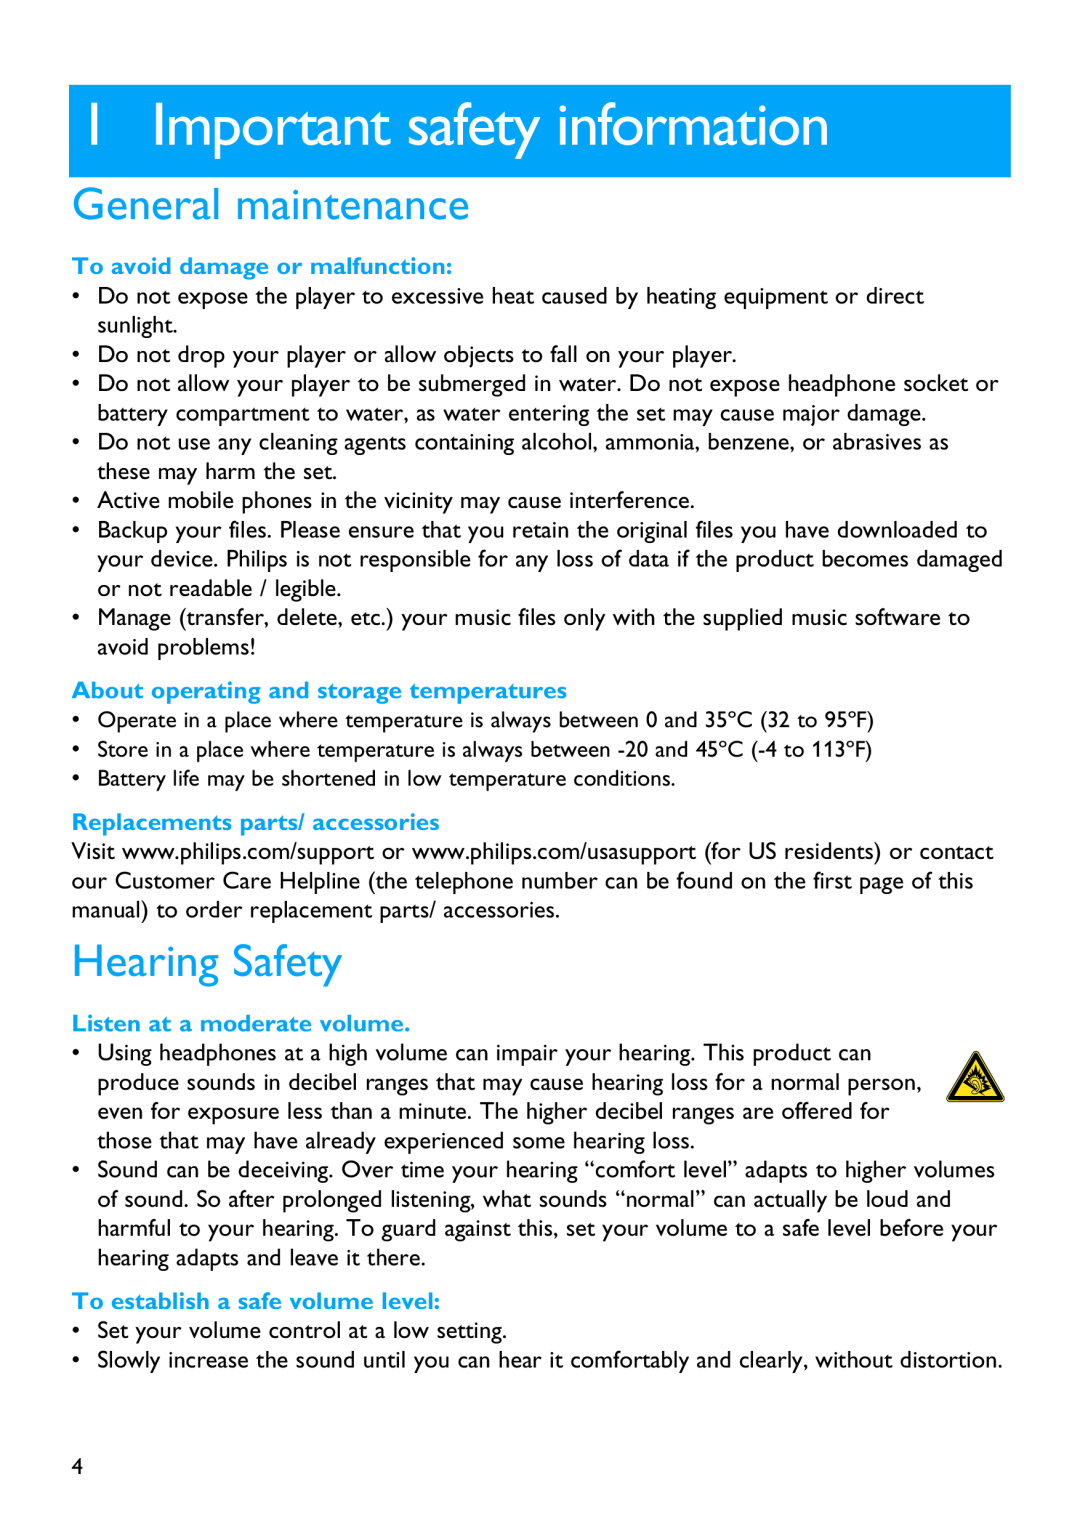 Philips SA2200 manual Important safety information, General maintenance, Hearing Safety, To avoid damage or malfunction 